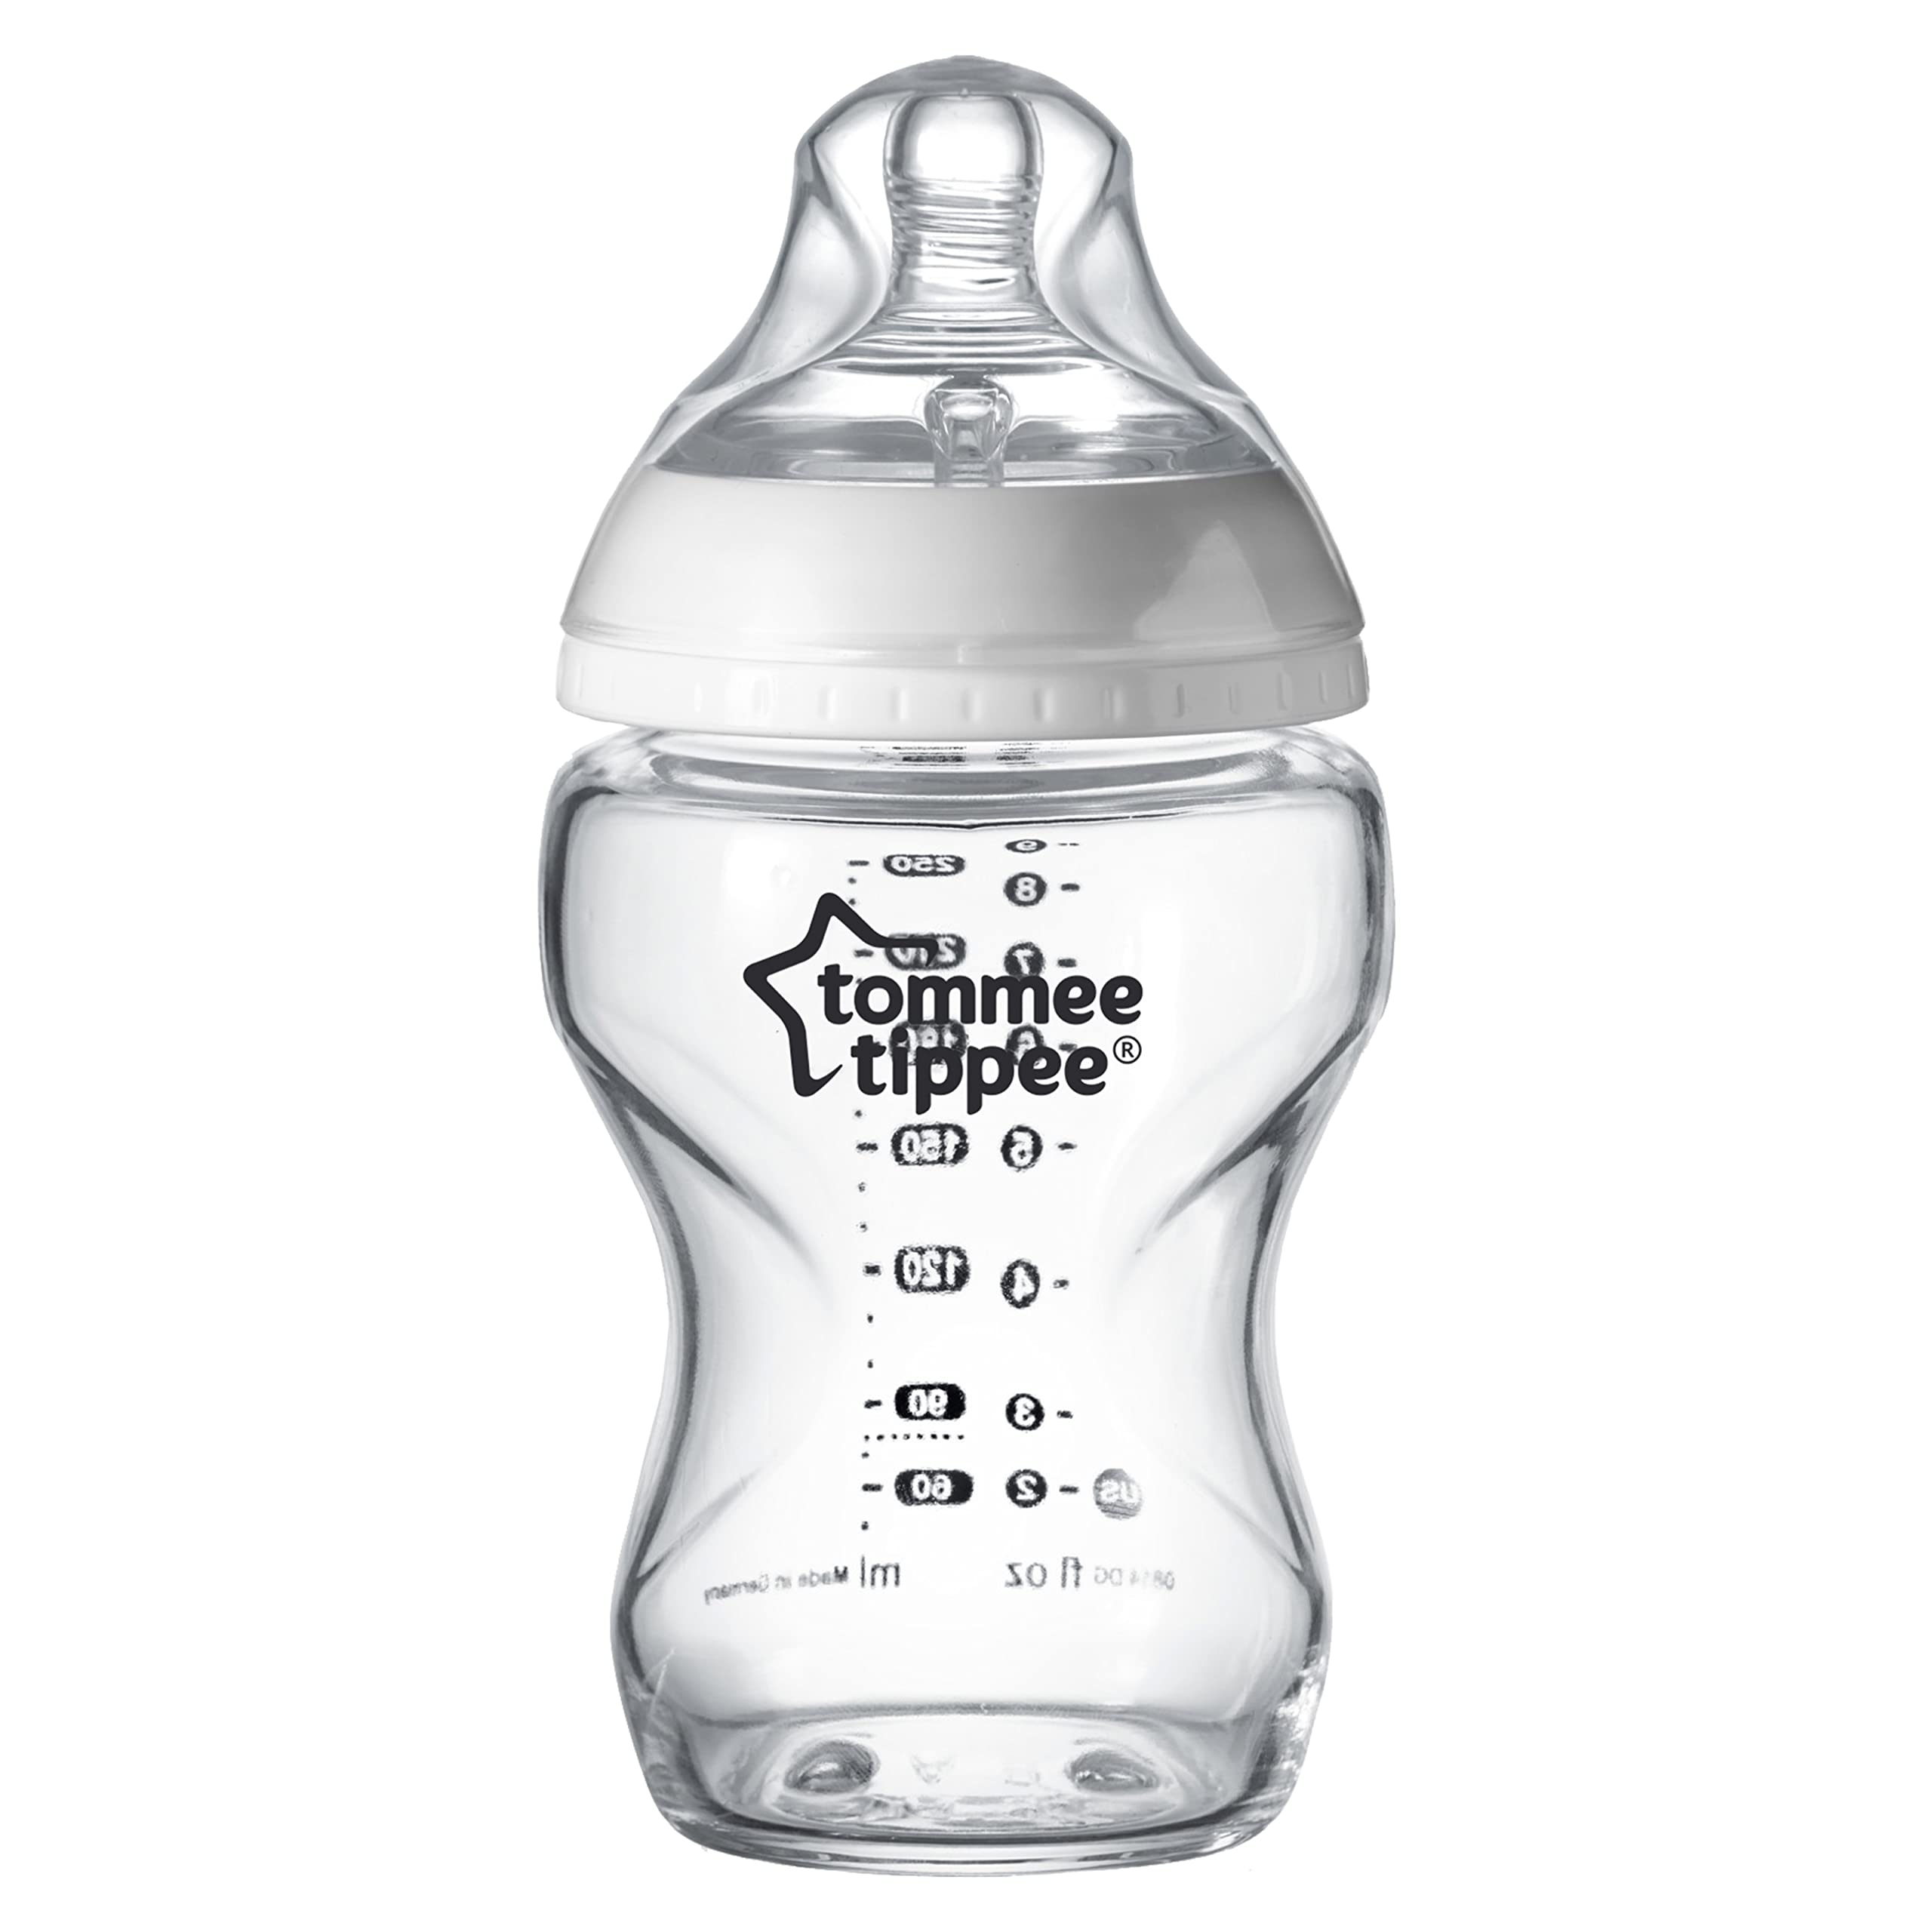 Tommee Tippee Closer to Nature Glass Feeding Bottle, 250ml x 1 (Clear)